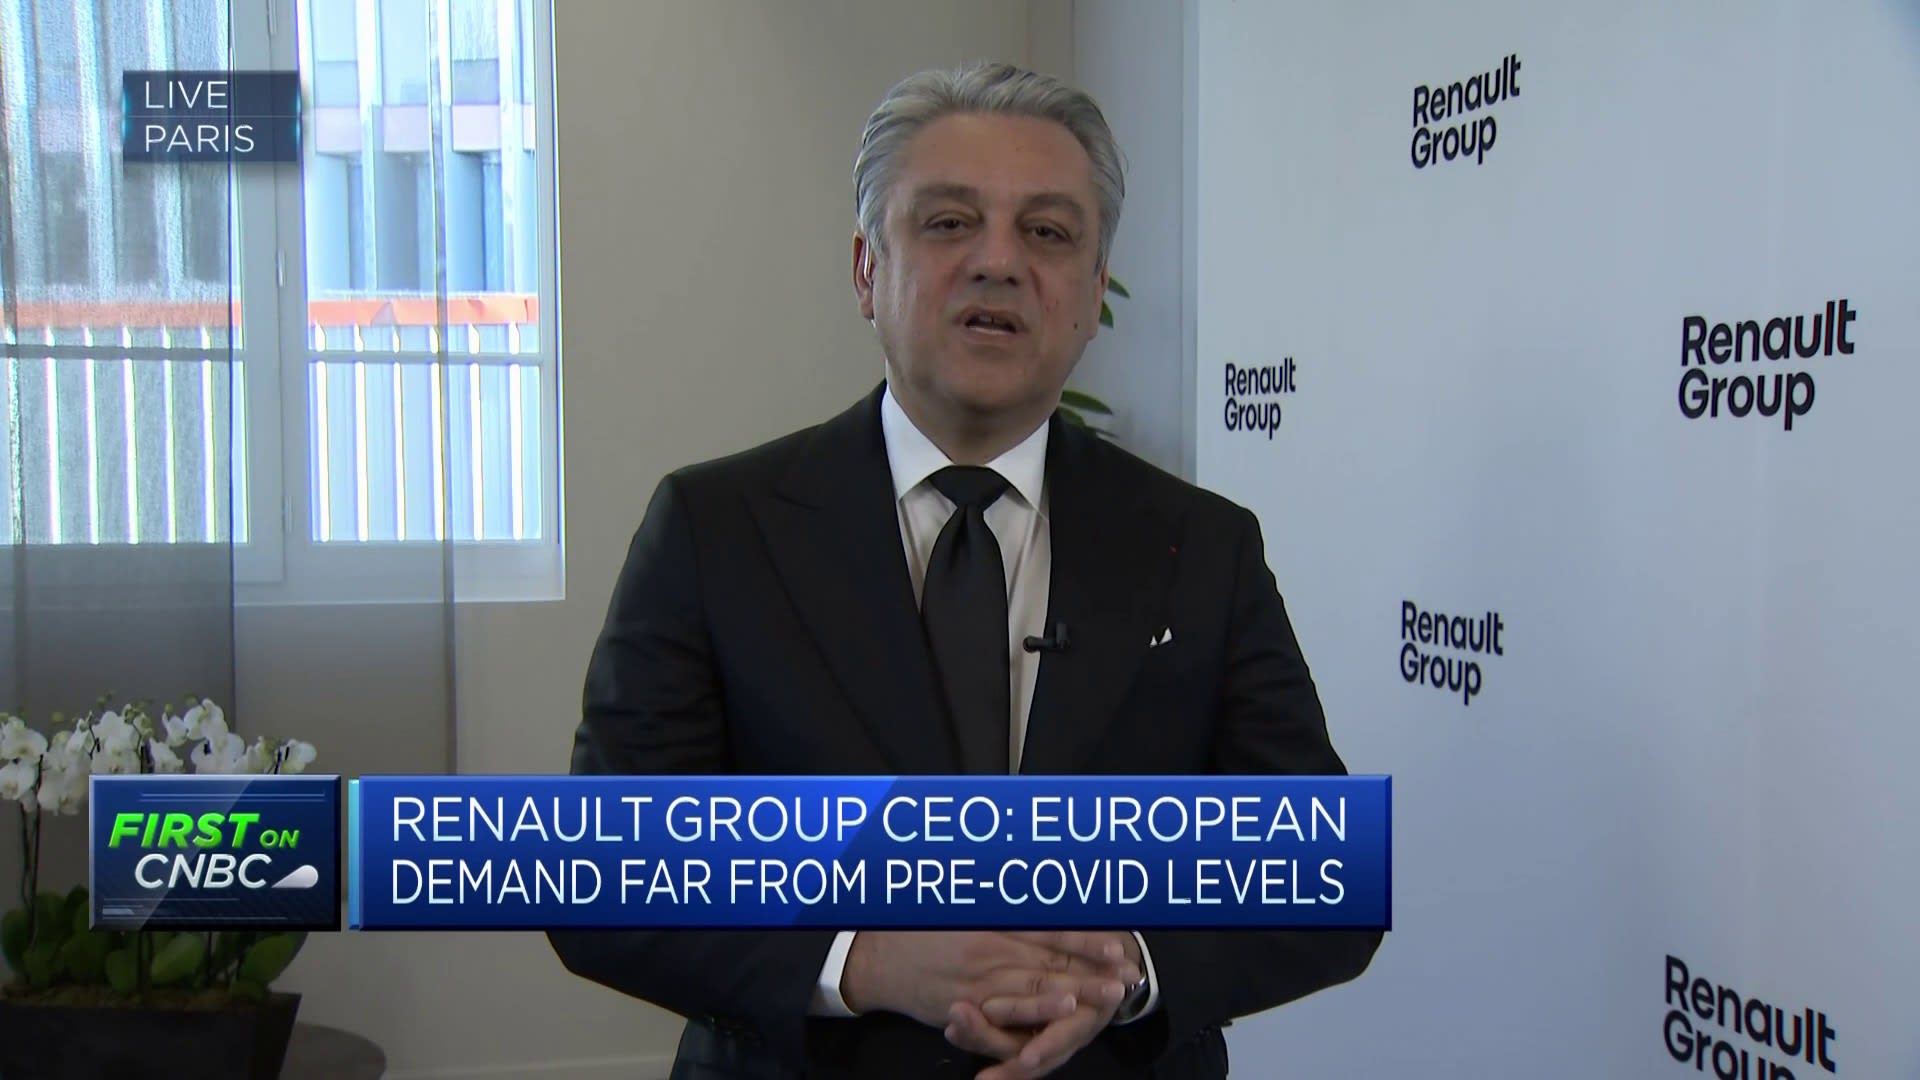 Renault CEO: EV pricing is challenging, but industry must 'fight' for the technology